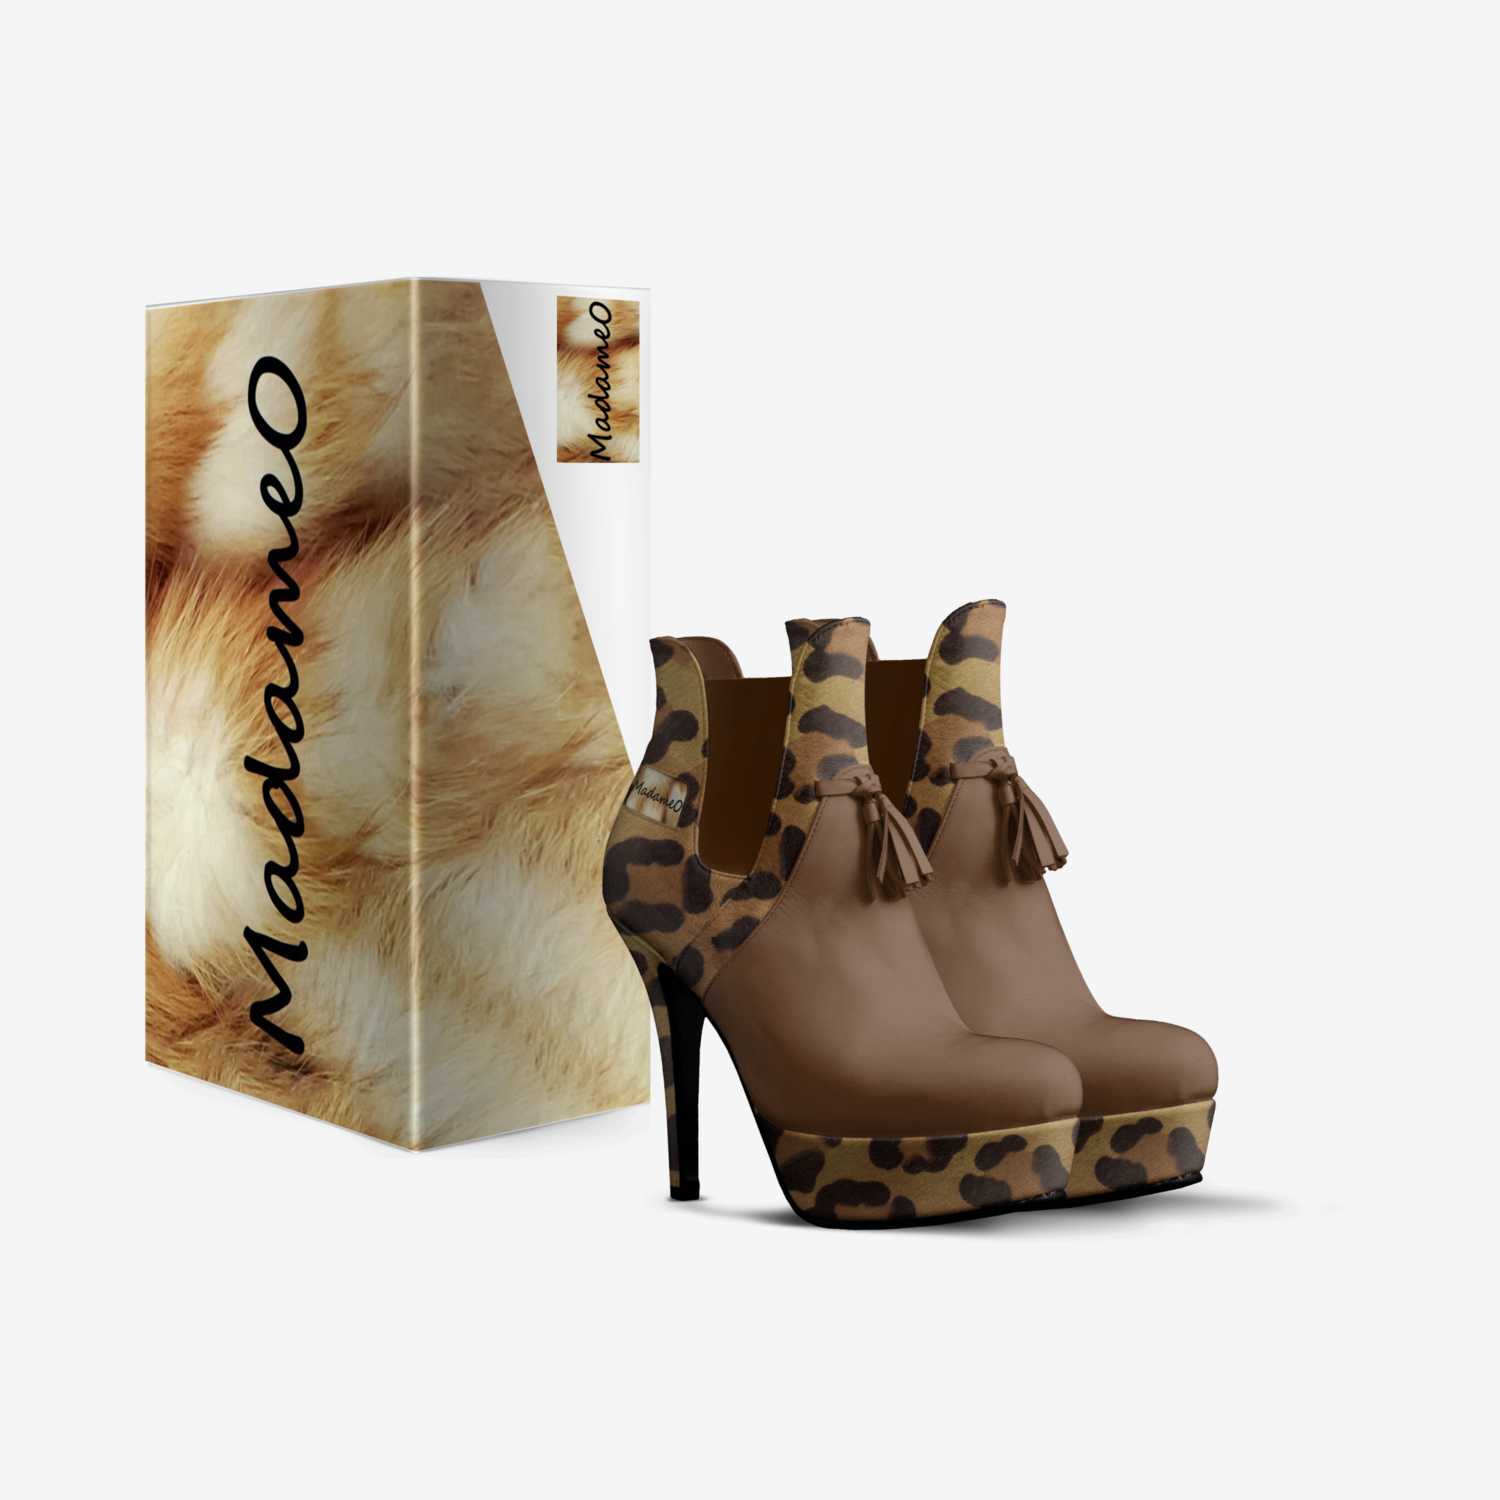 MadameO'sLeopard custom made in Italy shoes by Michelle Osterday | Box view